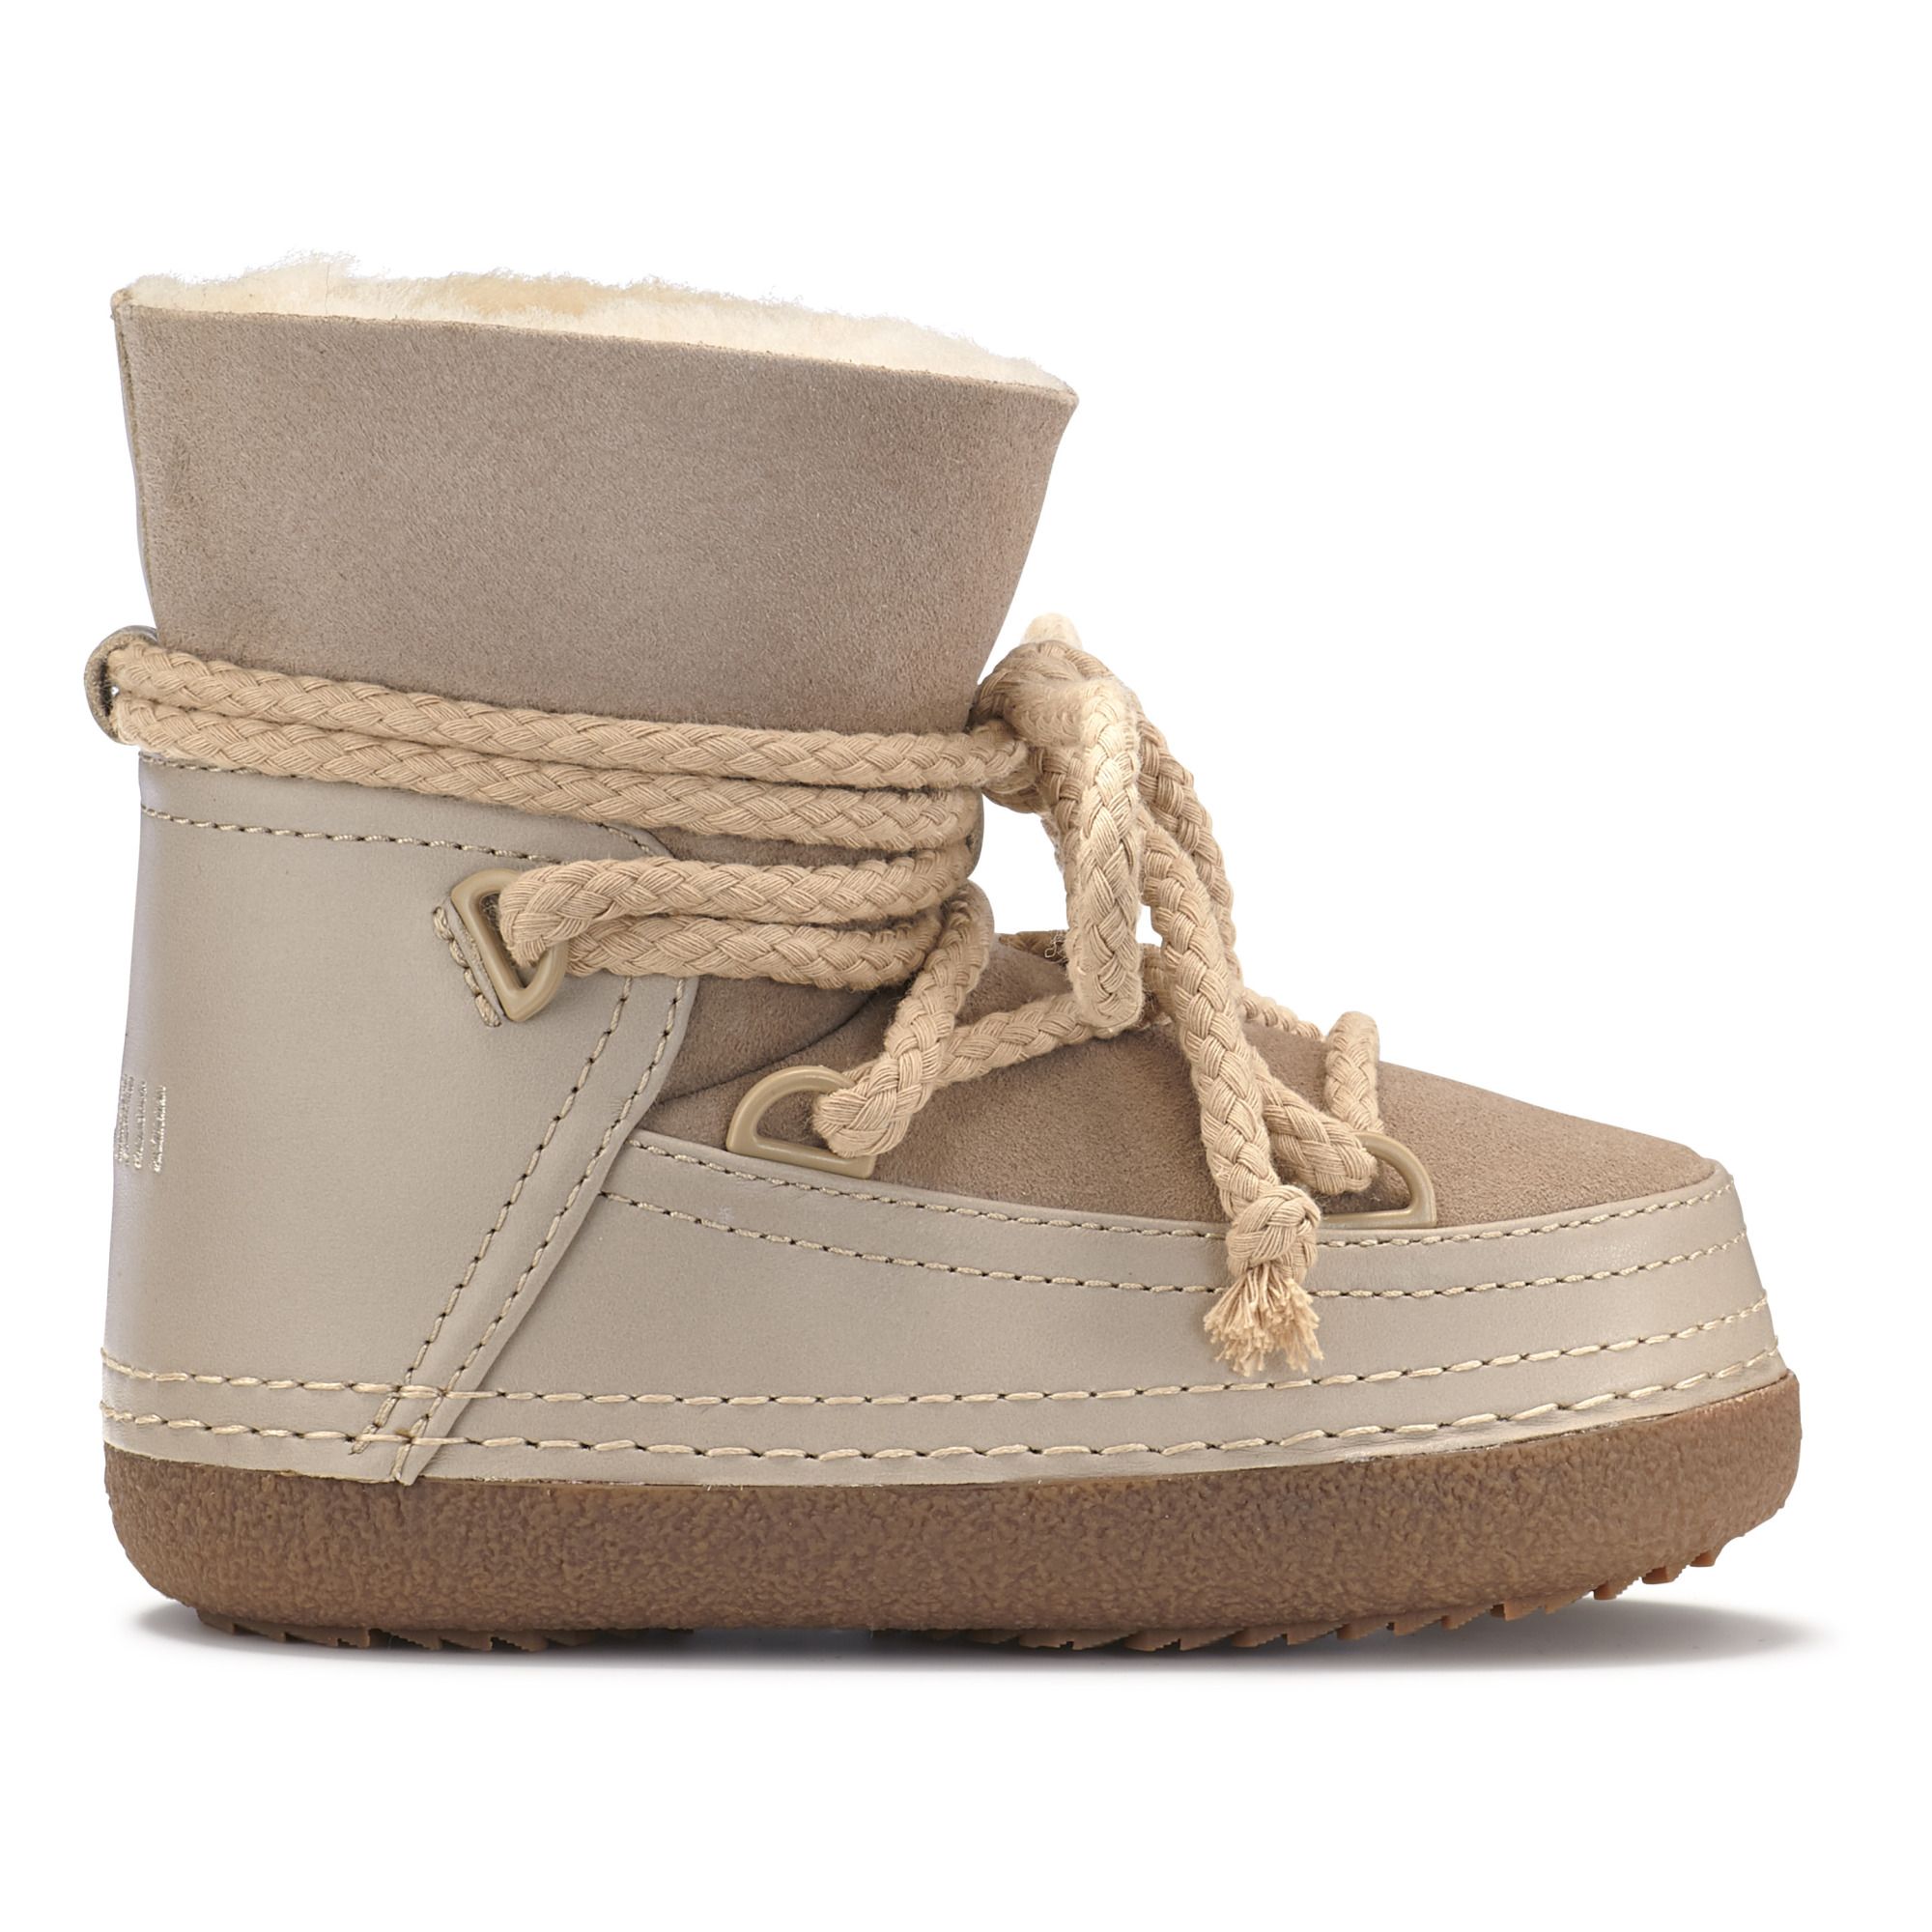 Inuikii - Boots Classic - Collection Enfant - - Fille - Beige